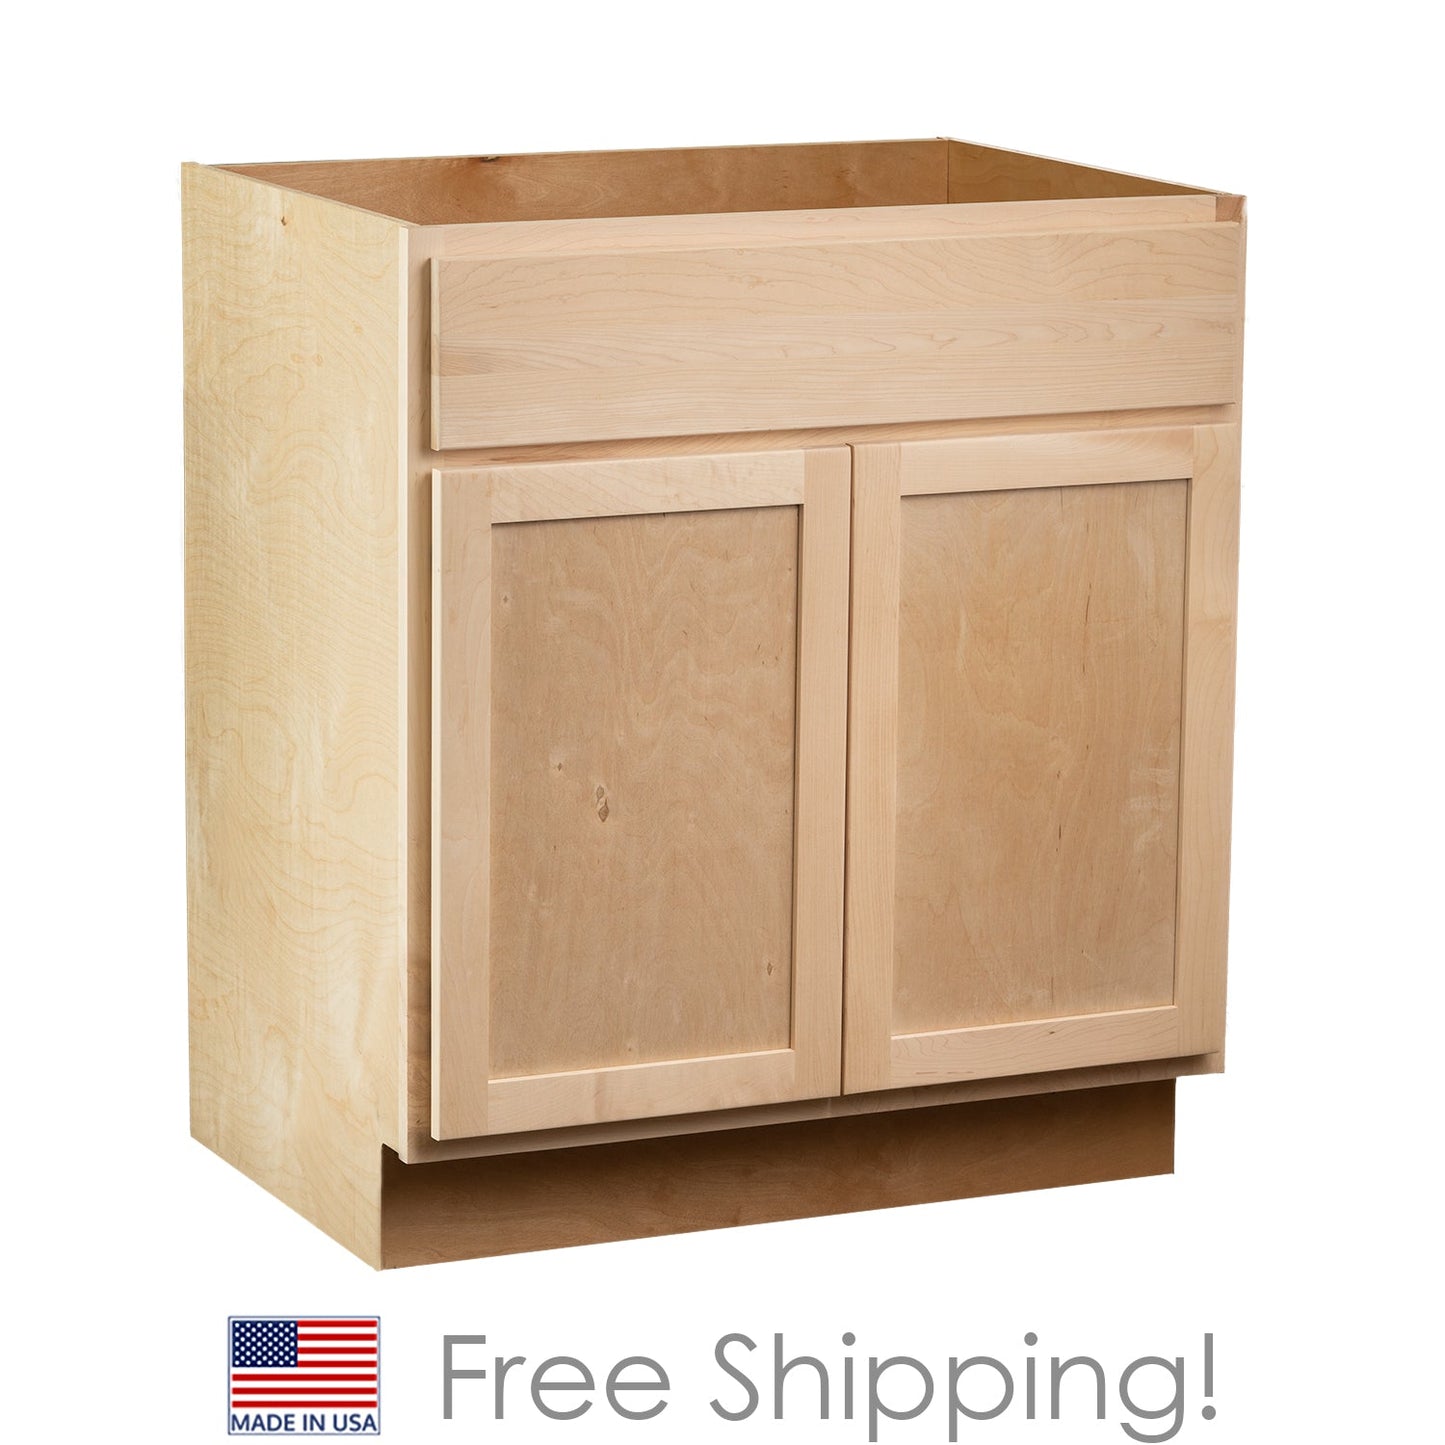 Quicklock RTA (Ready-to-Assemble) Raw Maple Vanity Base Cabinet | 24"Wx34.5"Hx18"D